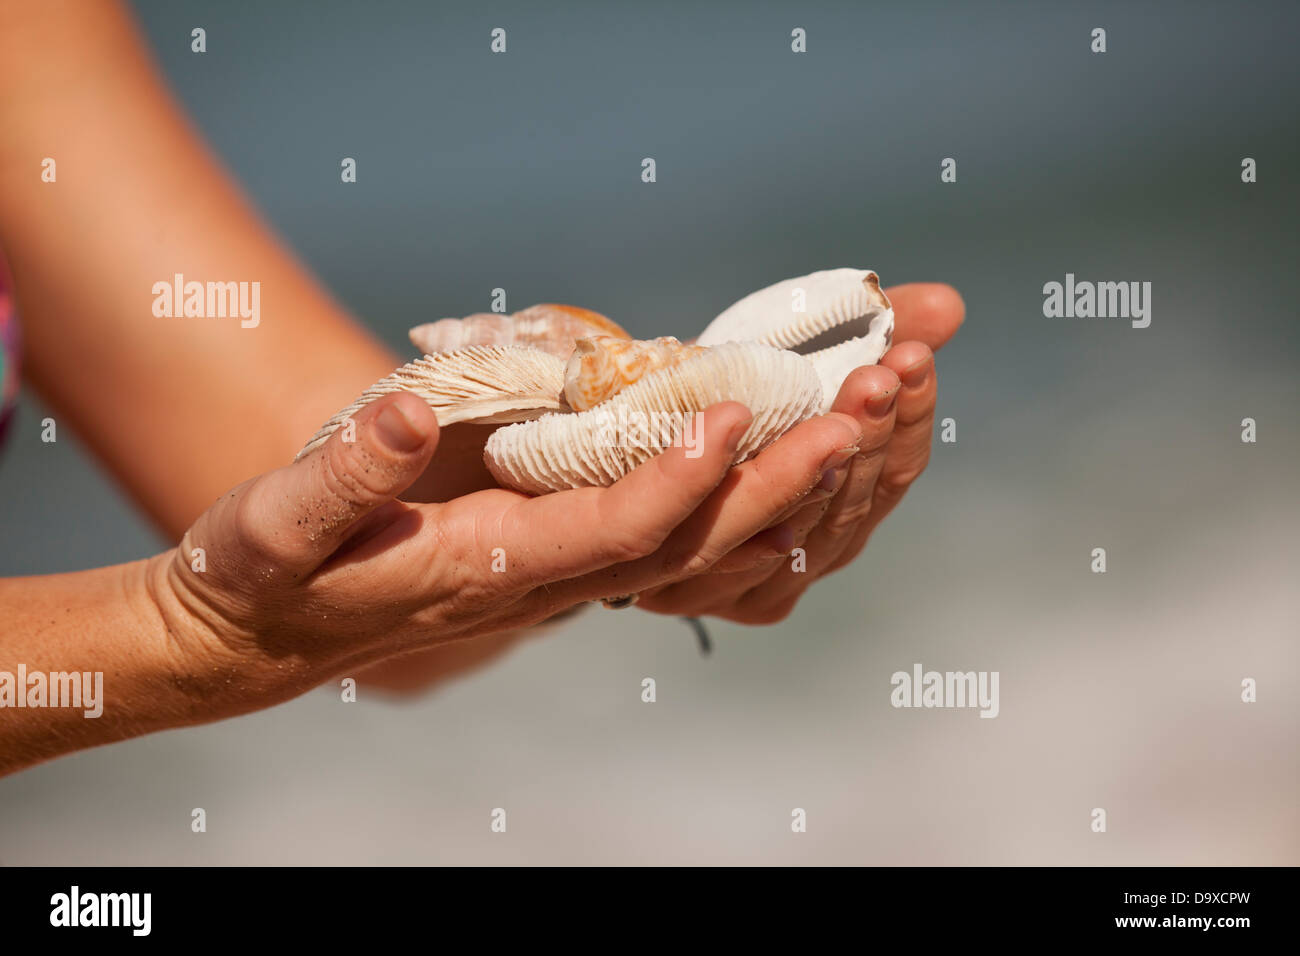 Woman's hands holding shells Stock Photo